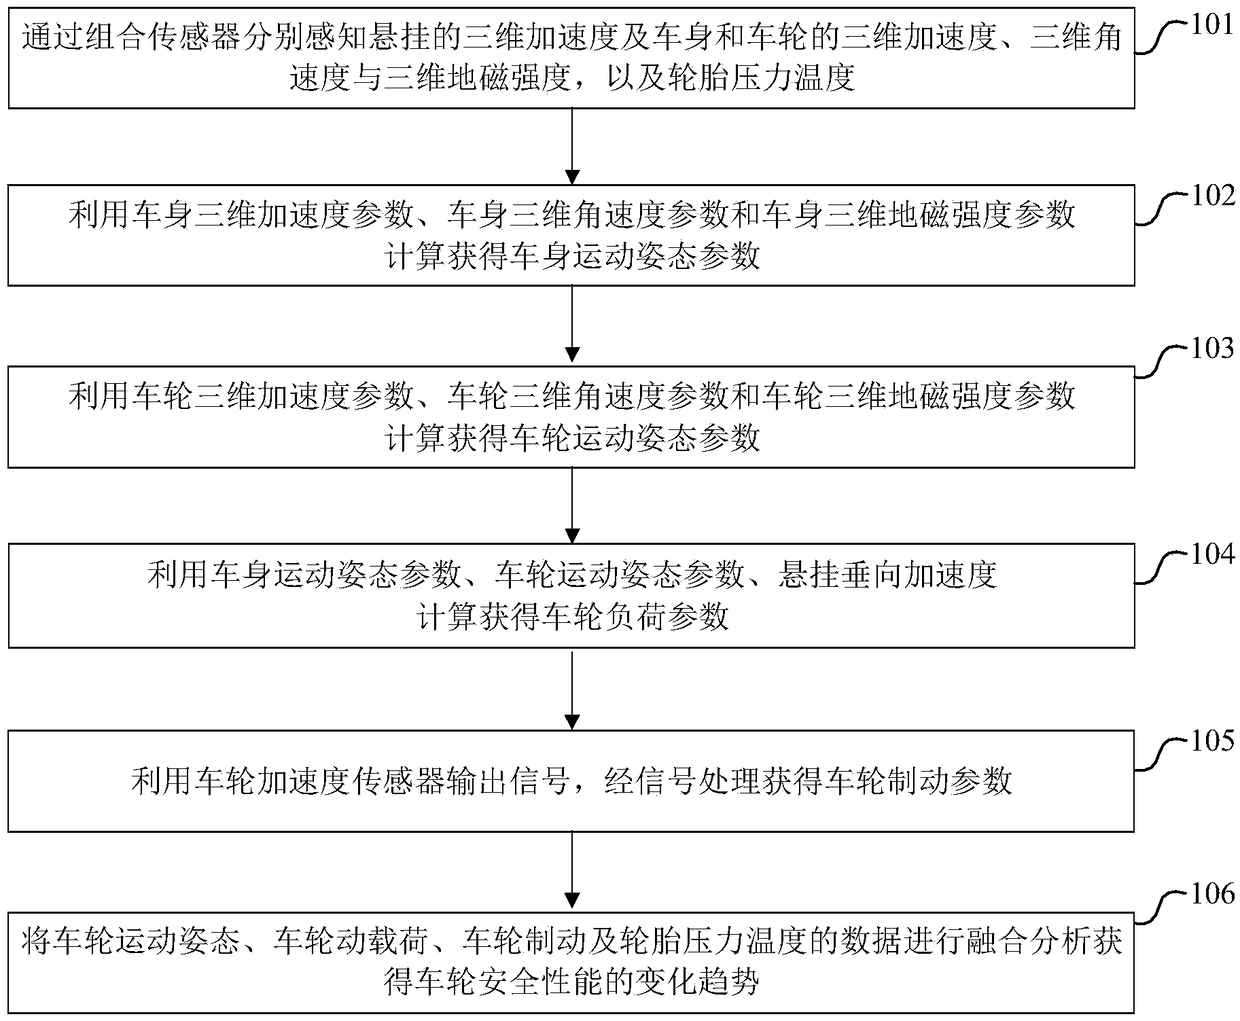 Dynamic monitoring method and system for safety performance of automobile wheel